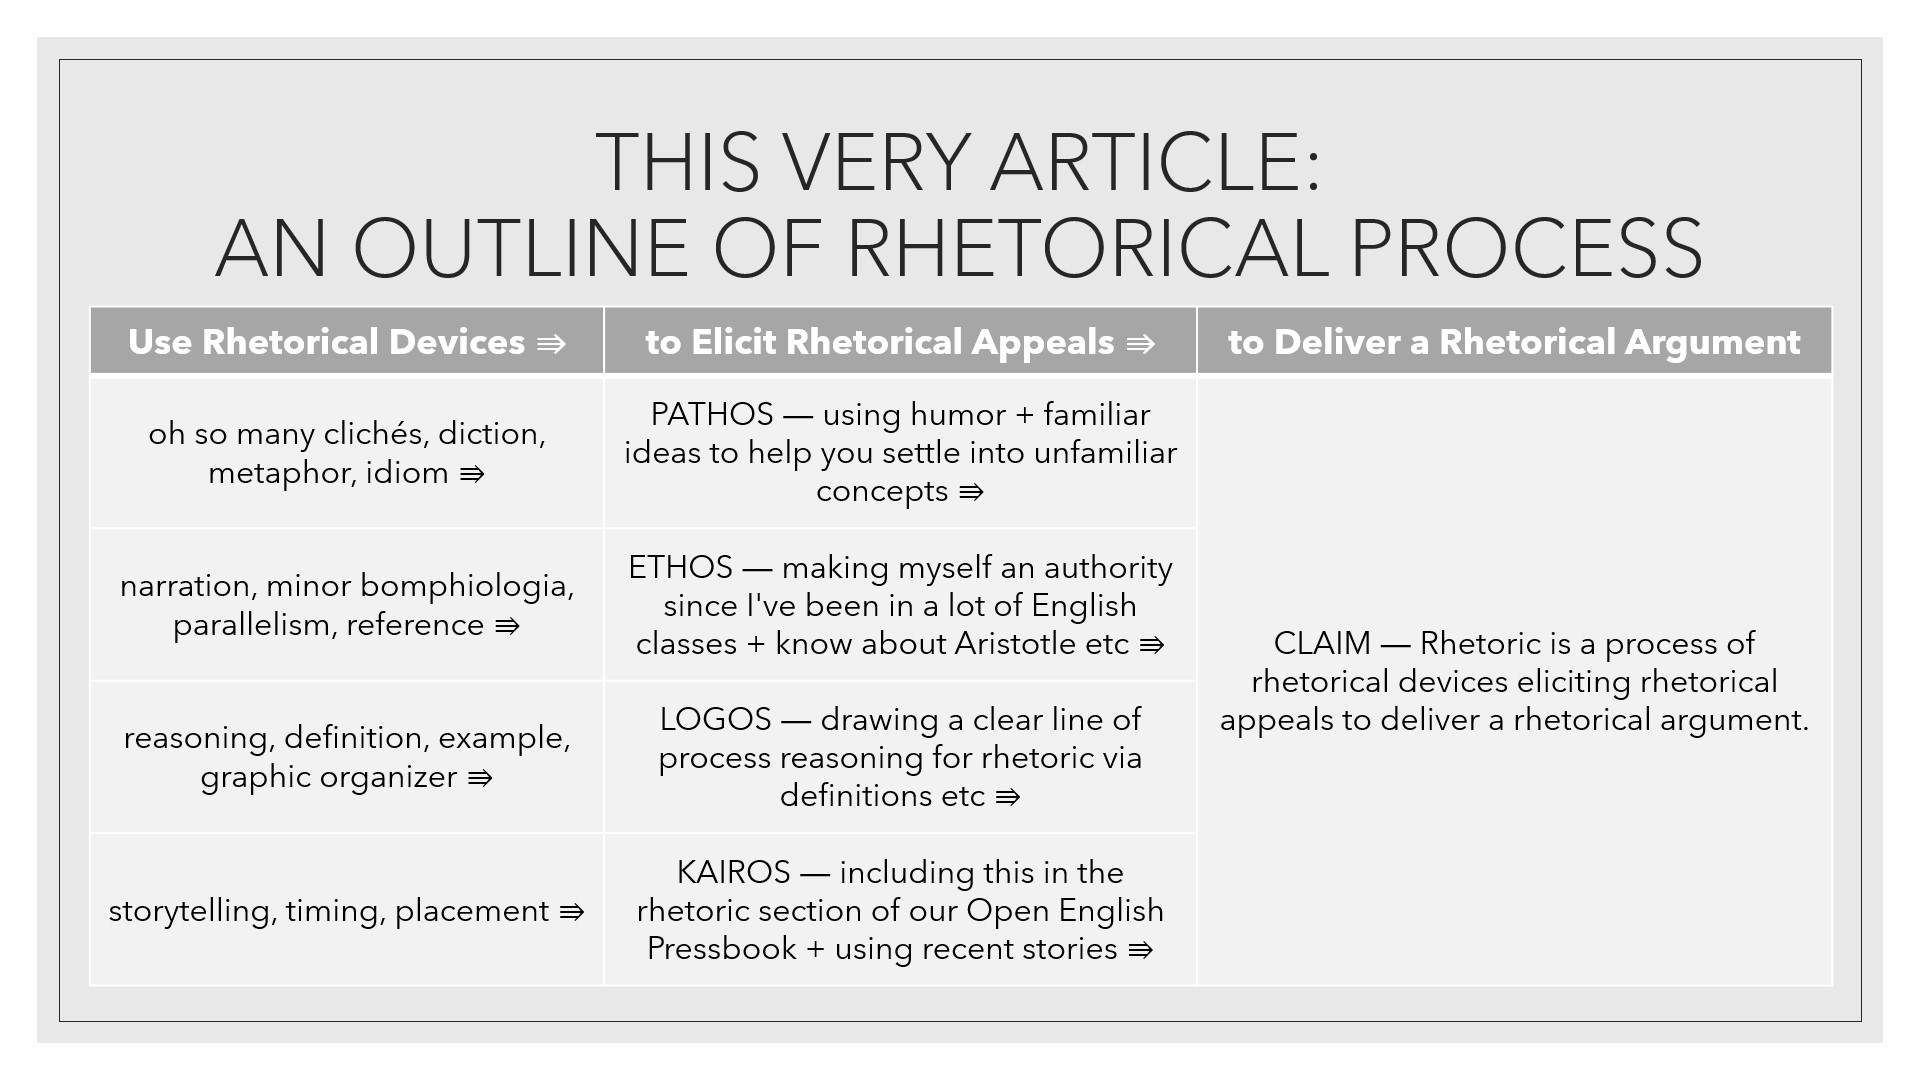 an outline showing how this article uses rhetorical devices such as cliches, narration, reference, reasoning, definition, examples, timing and placement to elicit pathos (humor), ethos (credibility through experience and knowledge), logos (clear line of reasoning), and kairos (rhetoric section of online textbook to make the claim that rhetoric is a process of rhetorical devices eliciting rhetorical appeals to deliver a rhetorical argument